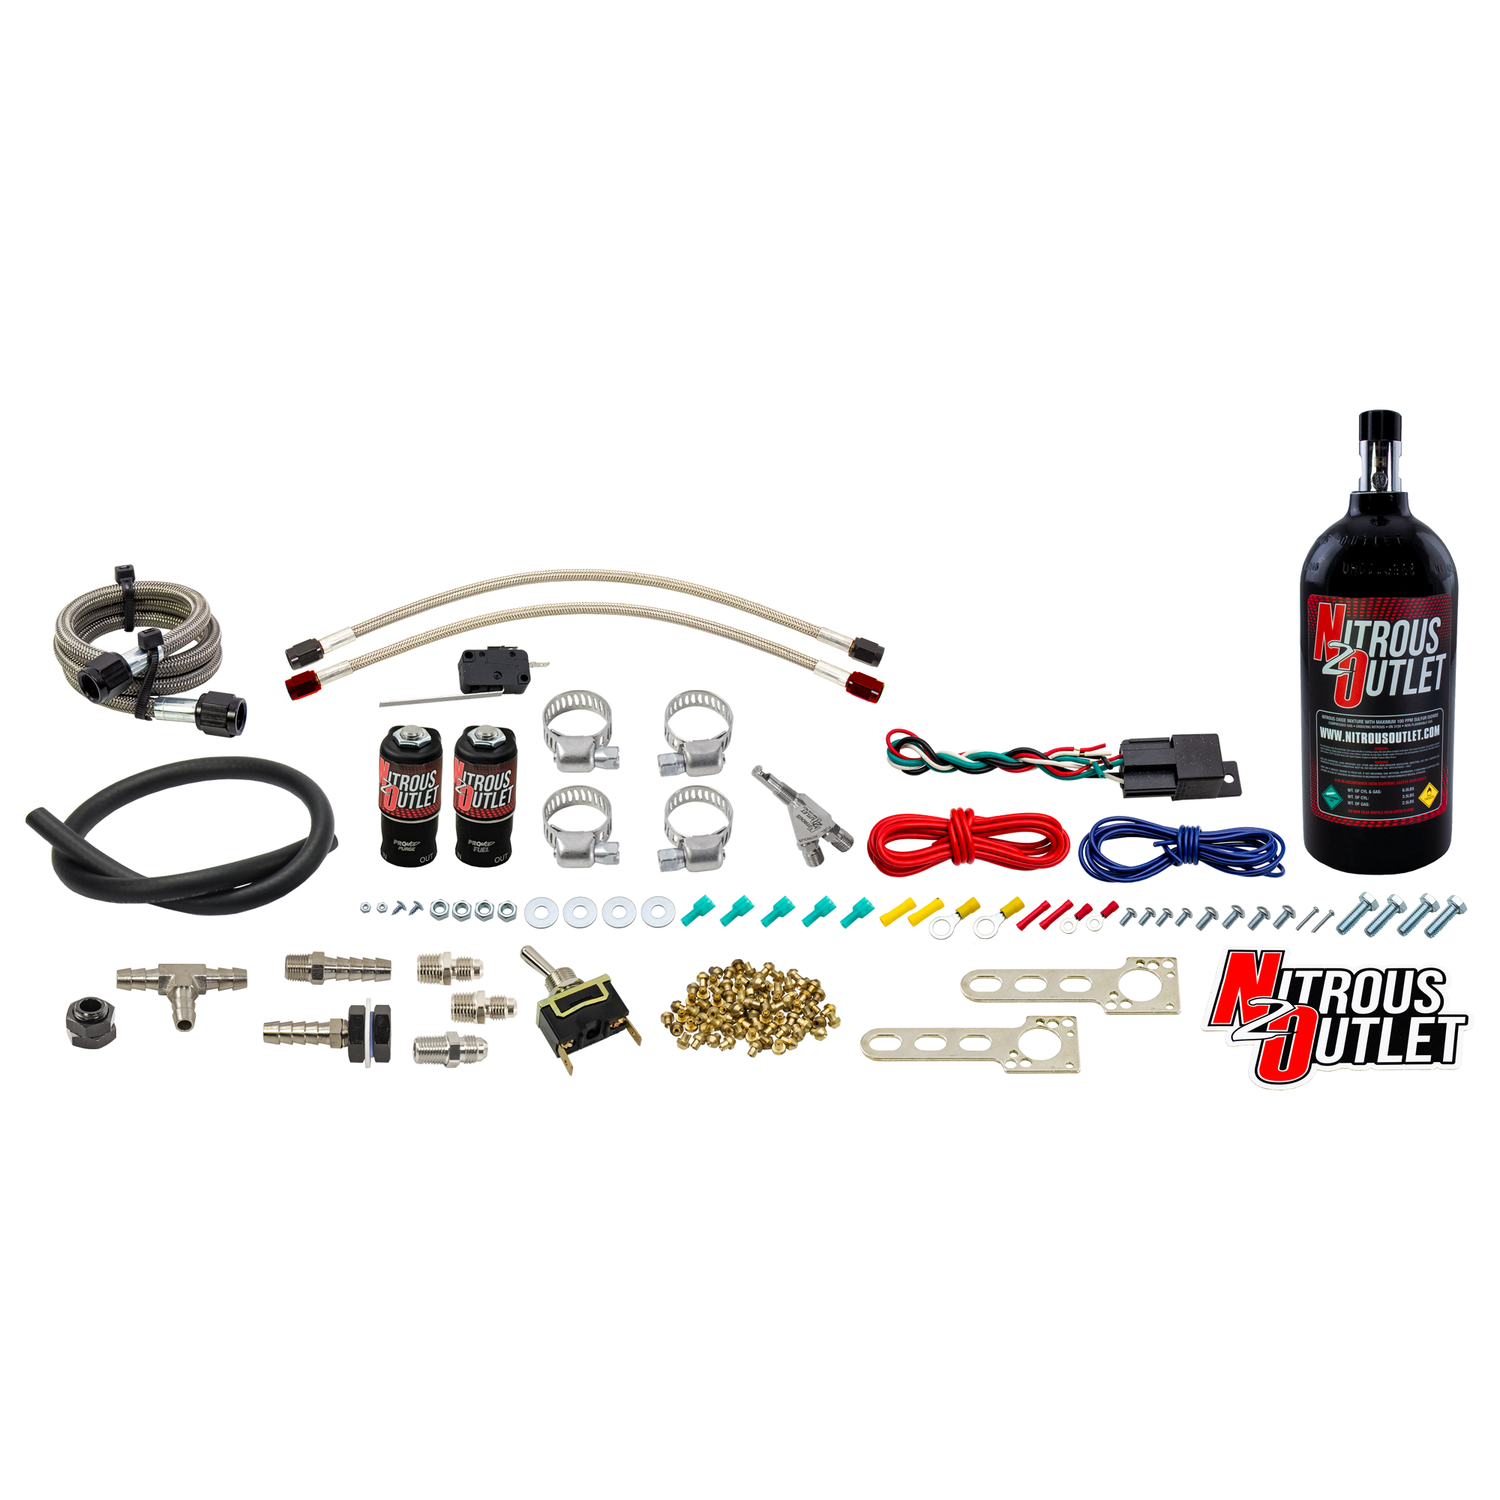 Single Cylinder Powersports Carbureted Nitrous Systems